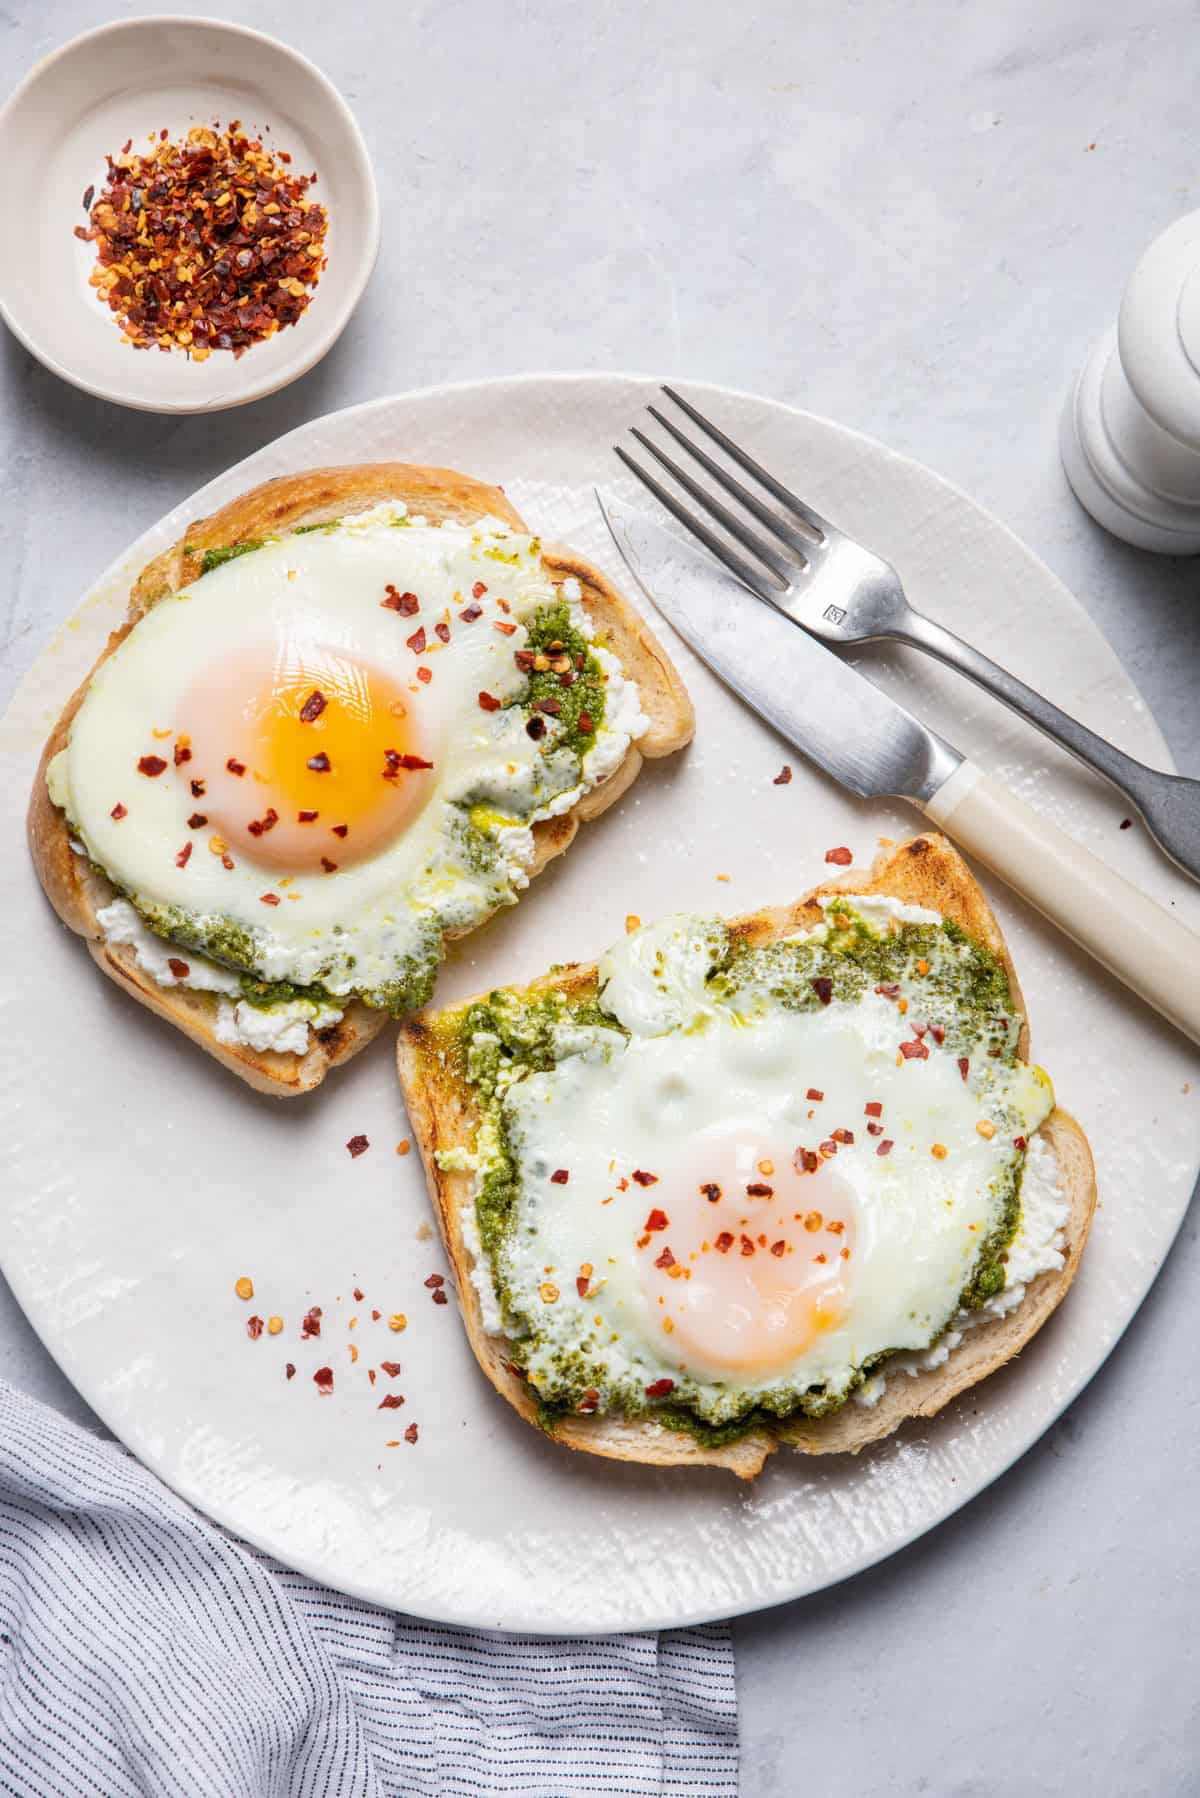 Plate with two pieces of bread topped with pesto eggs with fork and knife on plate